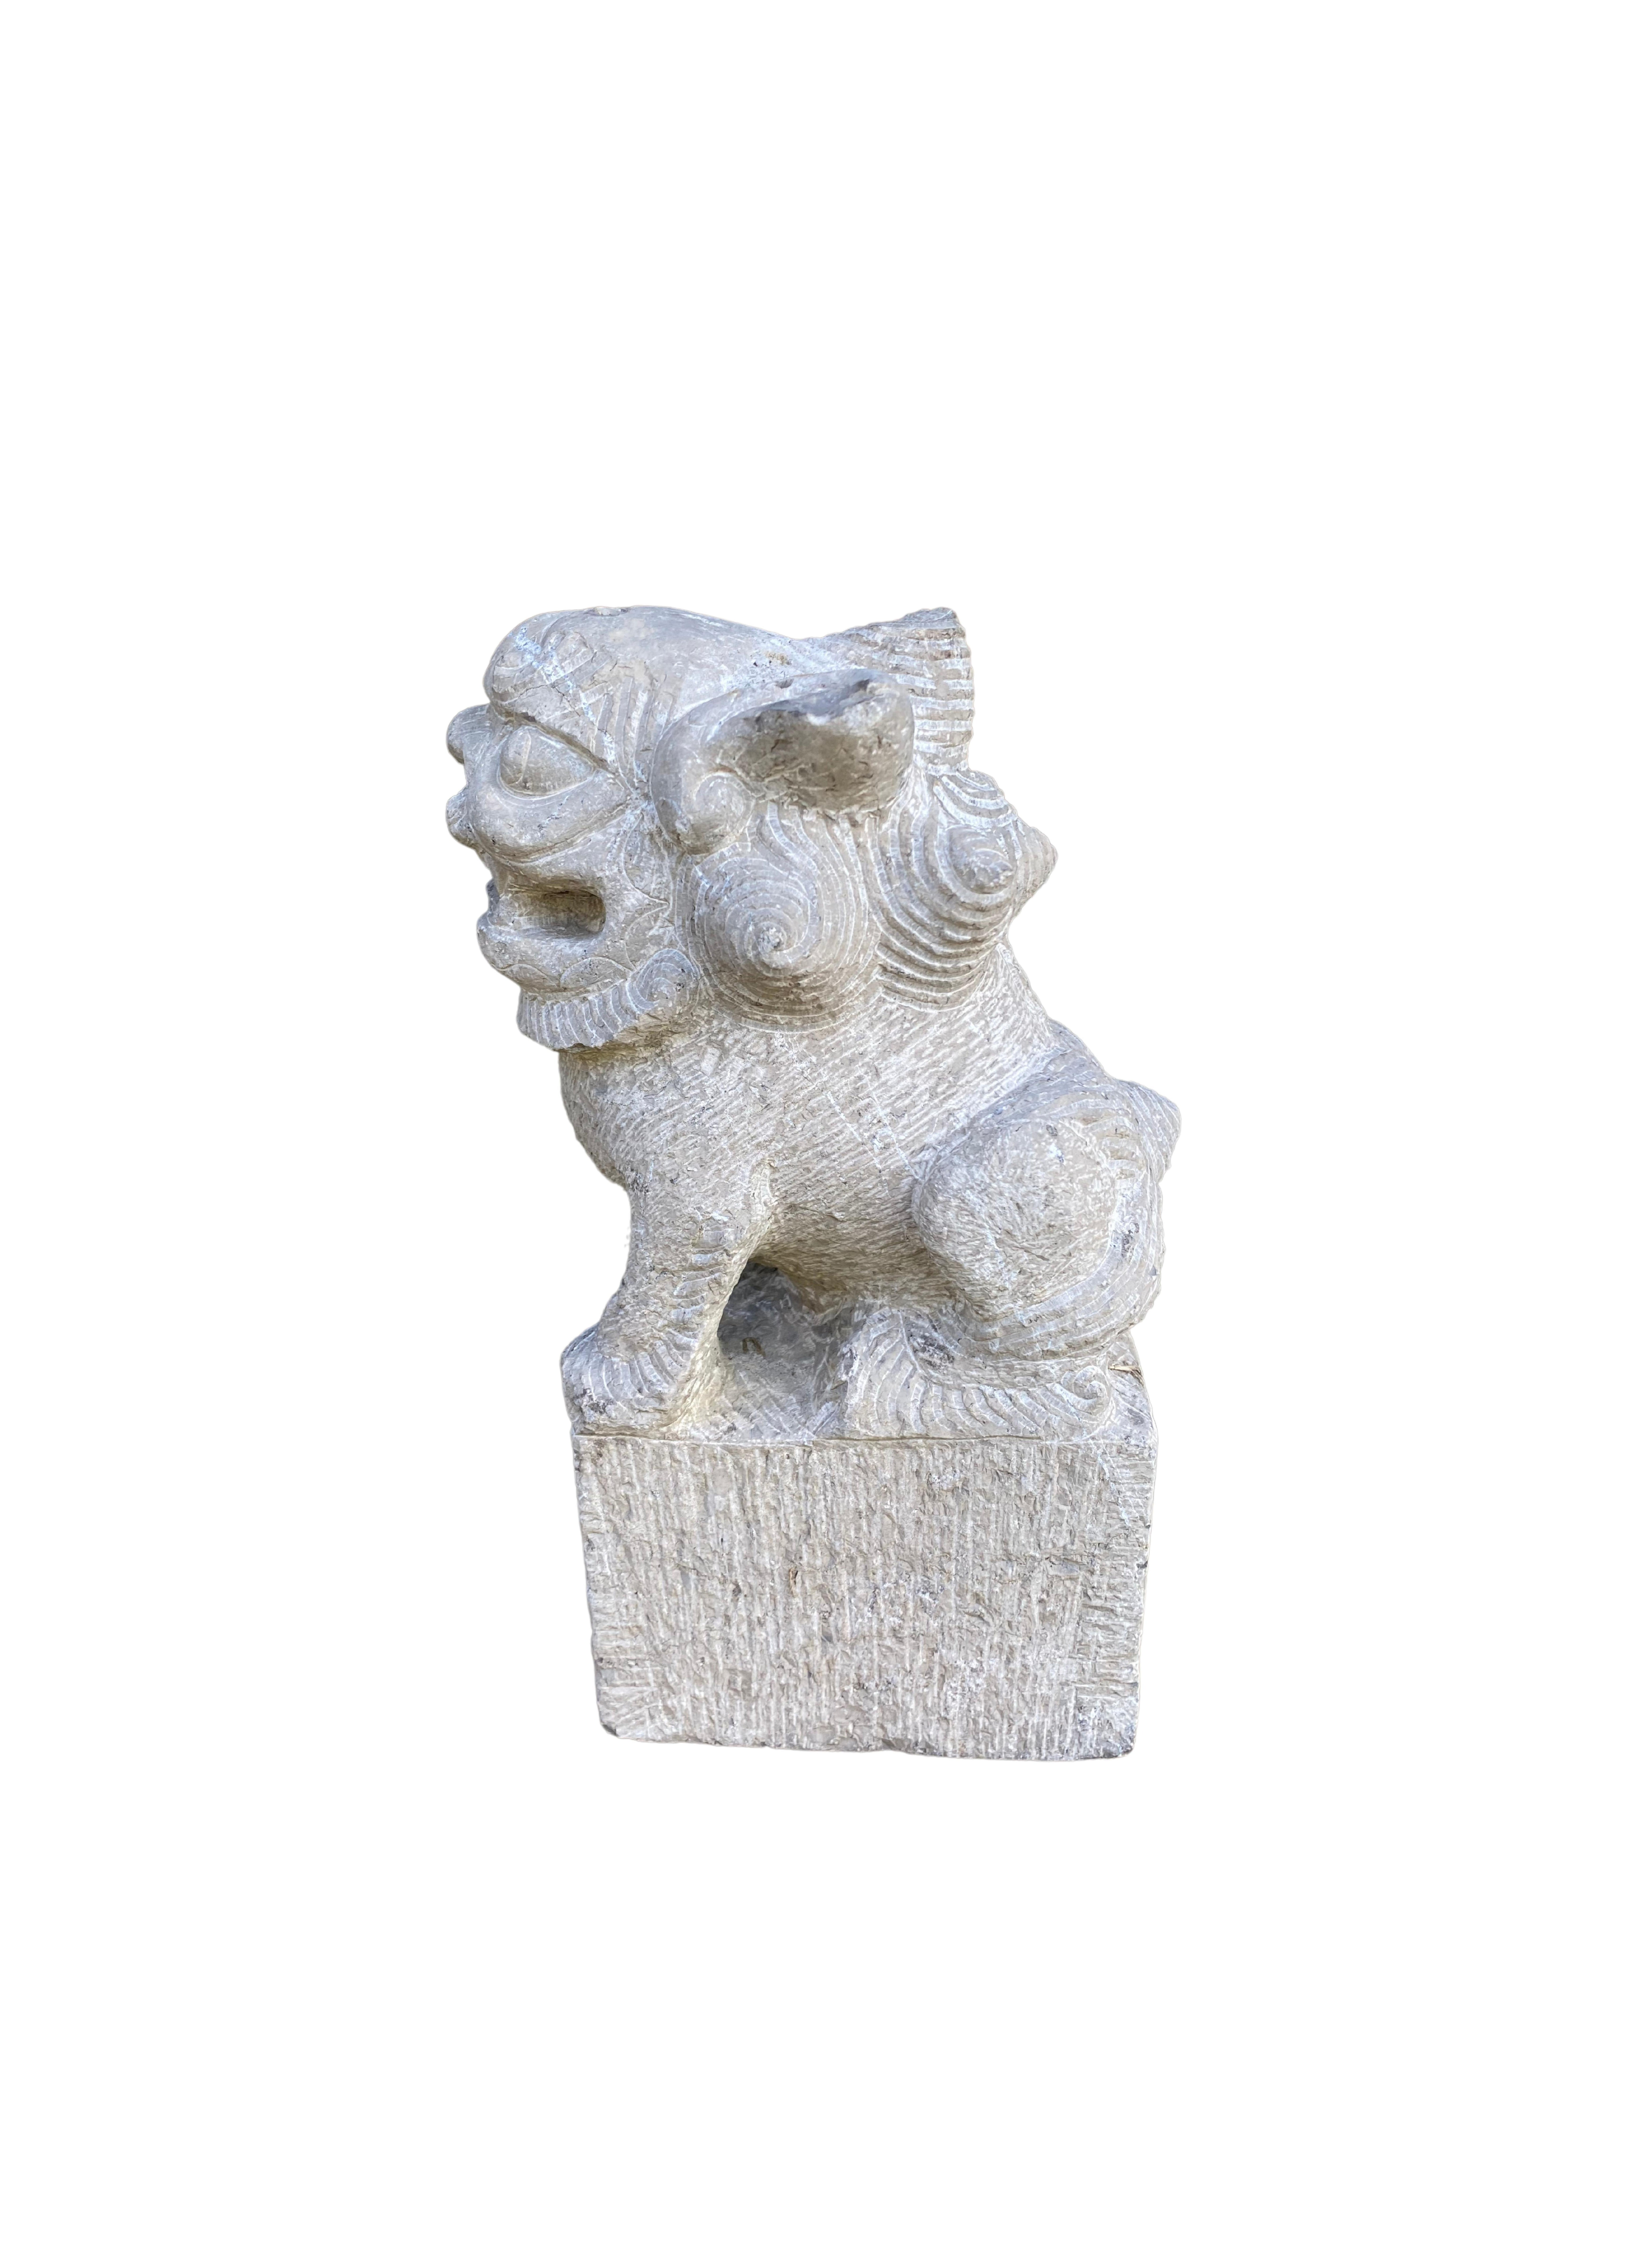 Hand-Carved Limestone Fu Dog Guardian Figure from China, c. 1900 For Sale